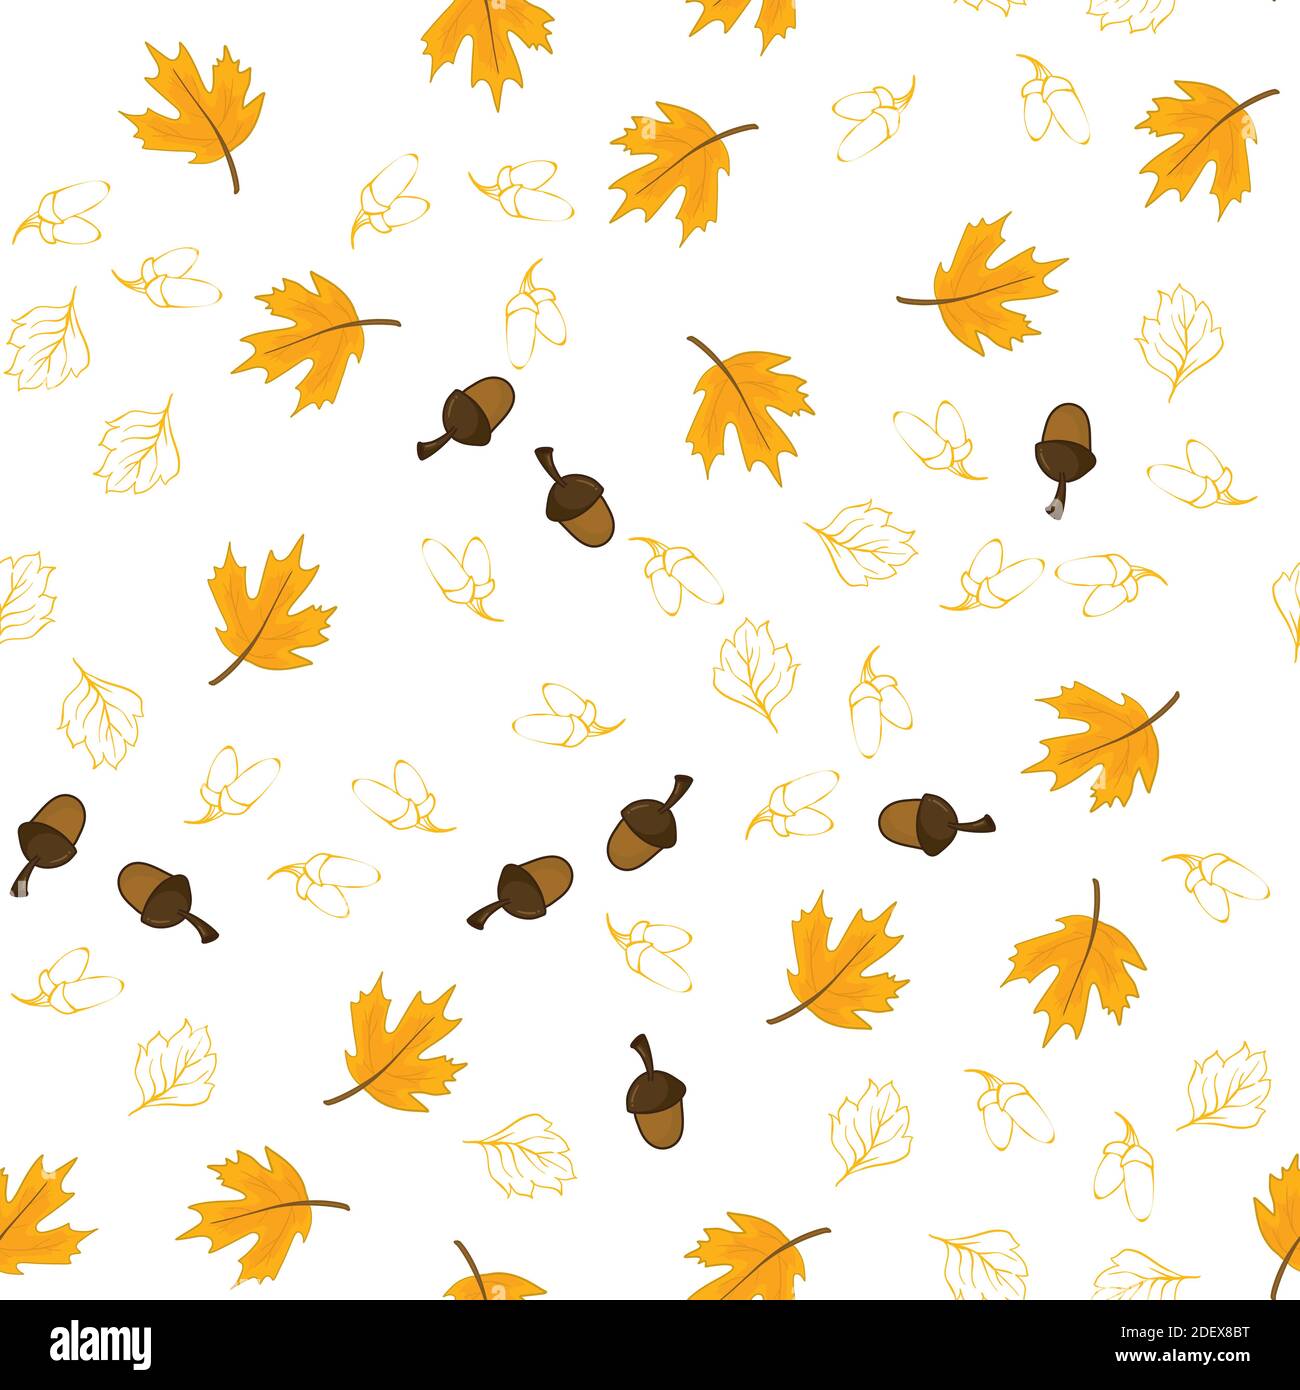 autumn pattern with fallen oak leaves and acorns on a white background Stock Vector